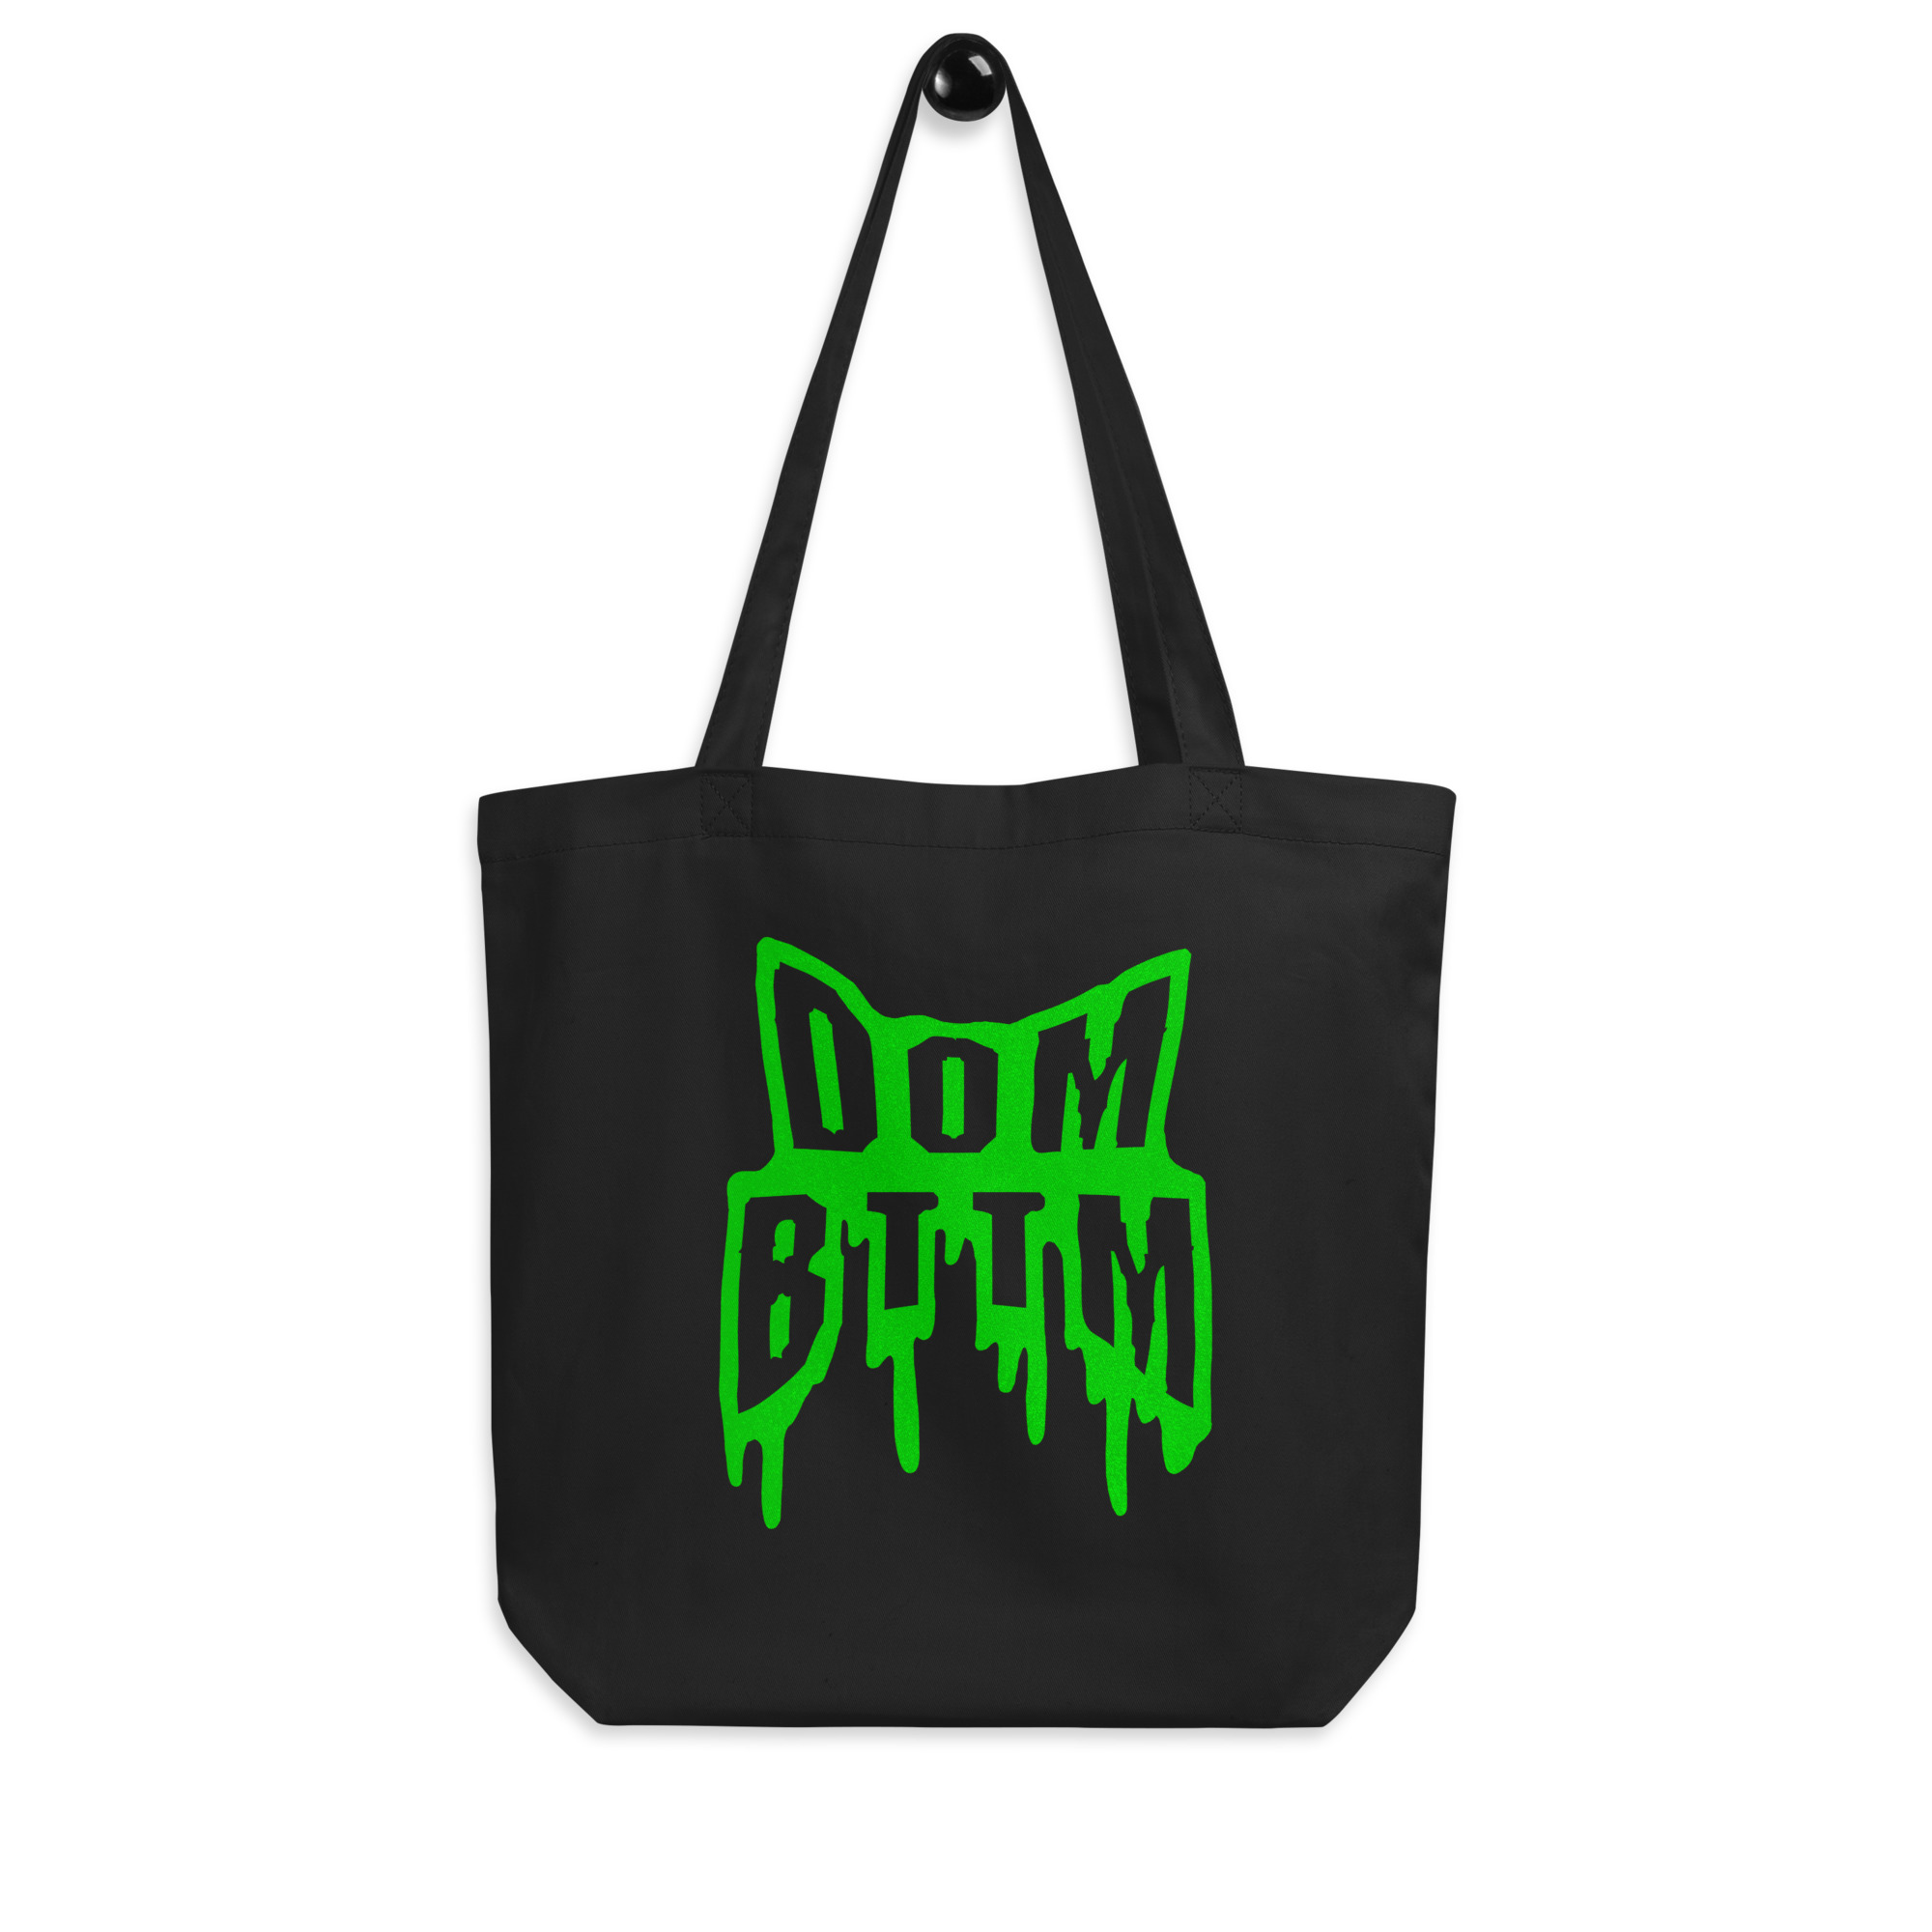 Featured image for “Dom Bttm - slime - Eco Tote Bag”